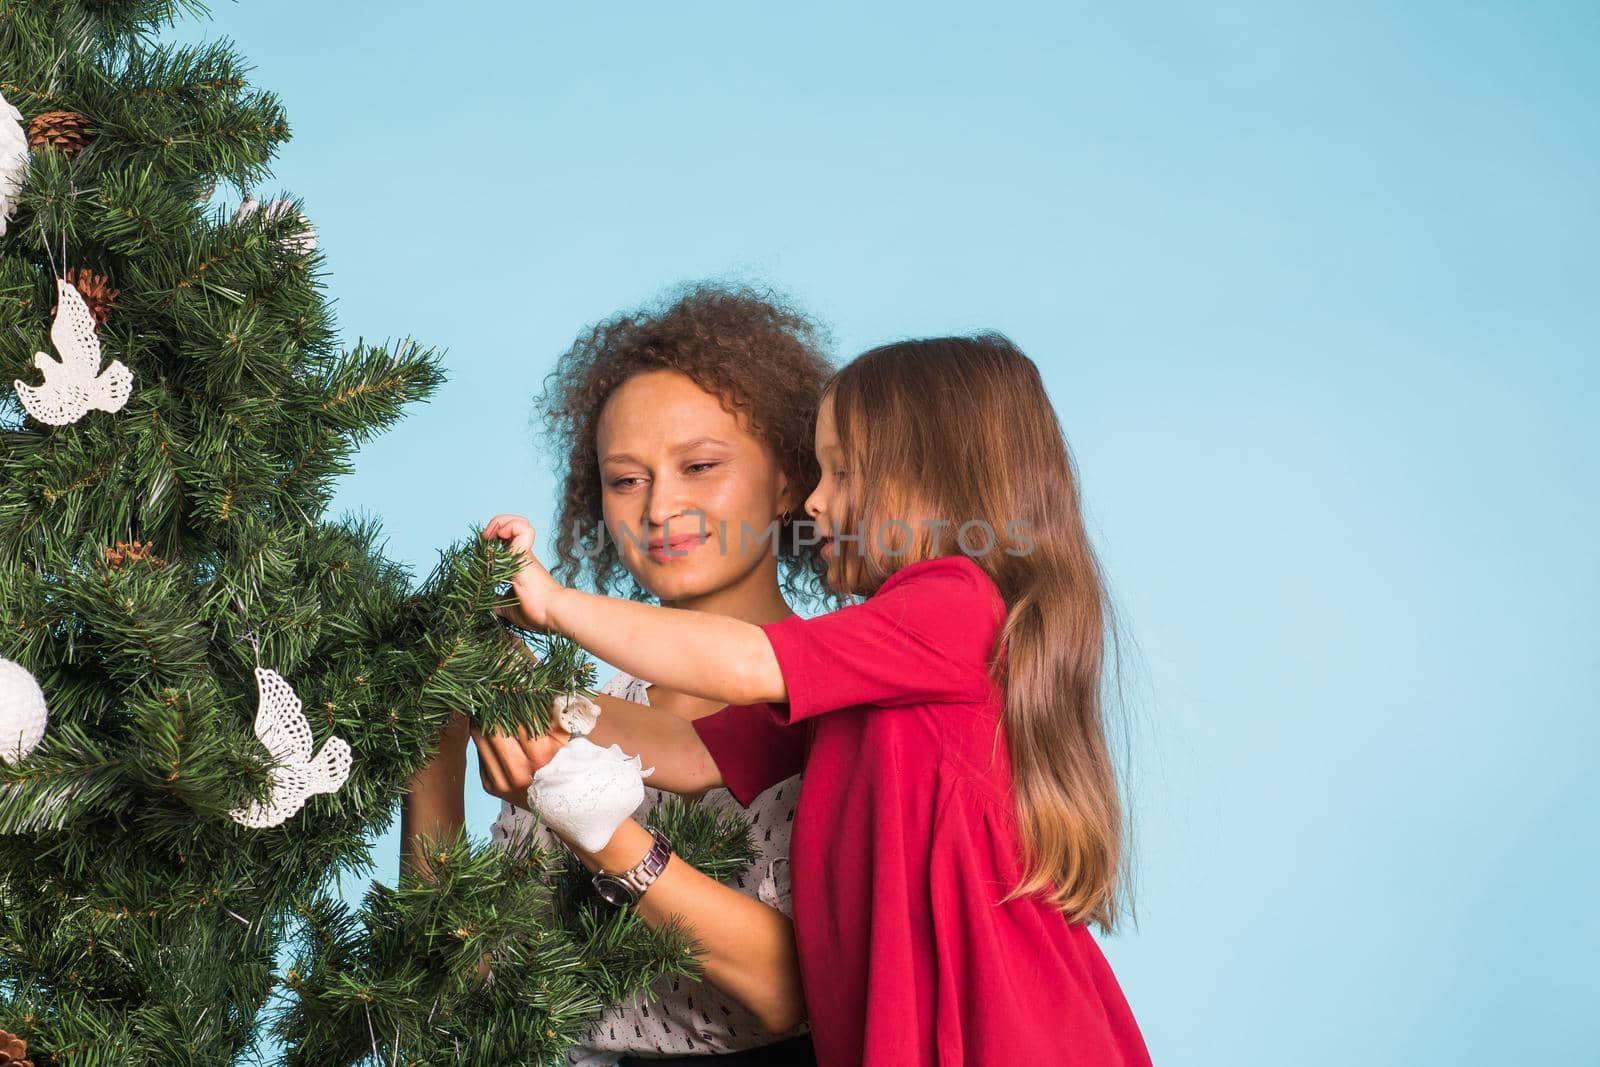 Holidays, family and christmas concept - pretty girl with mum are decorating a christmas tree on pink background.